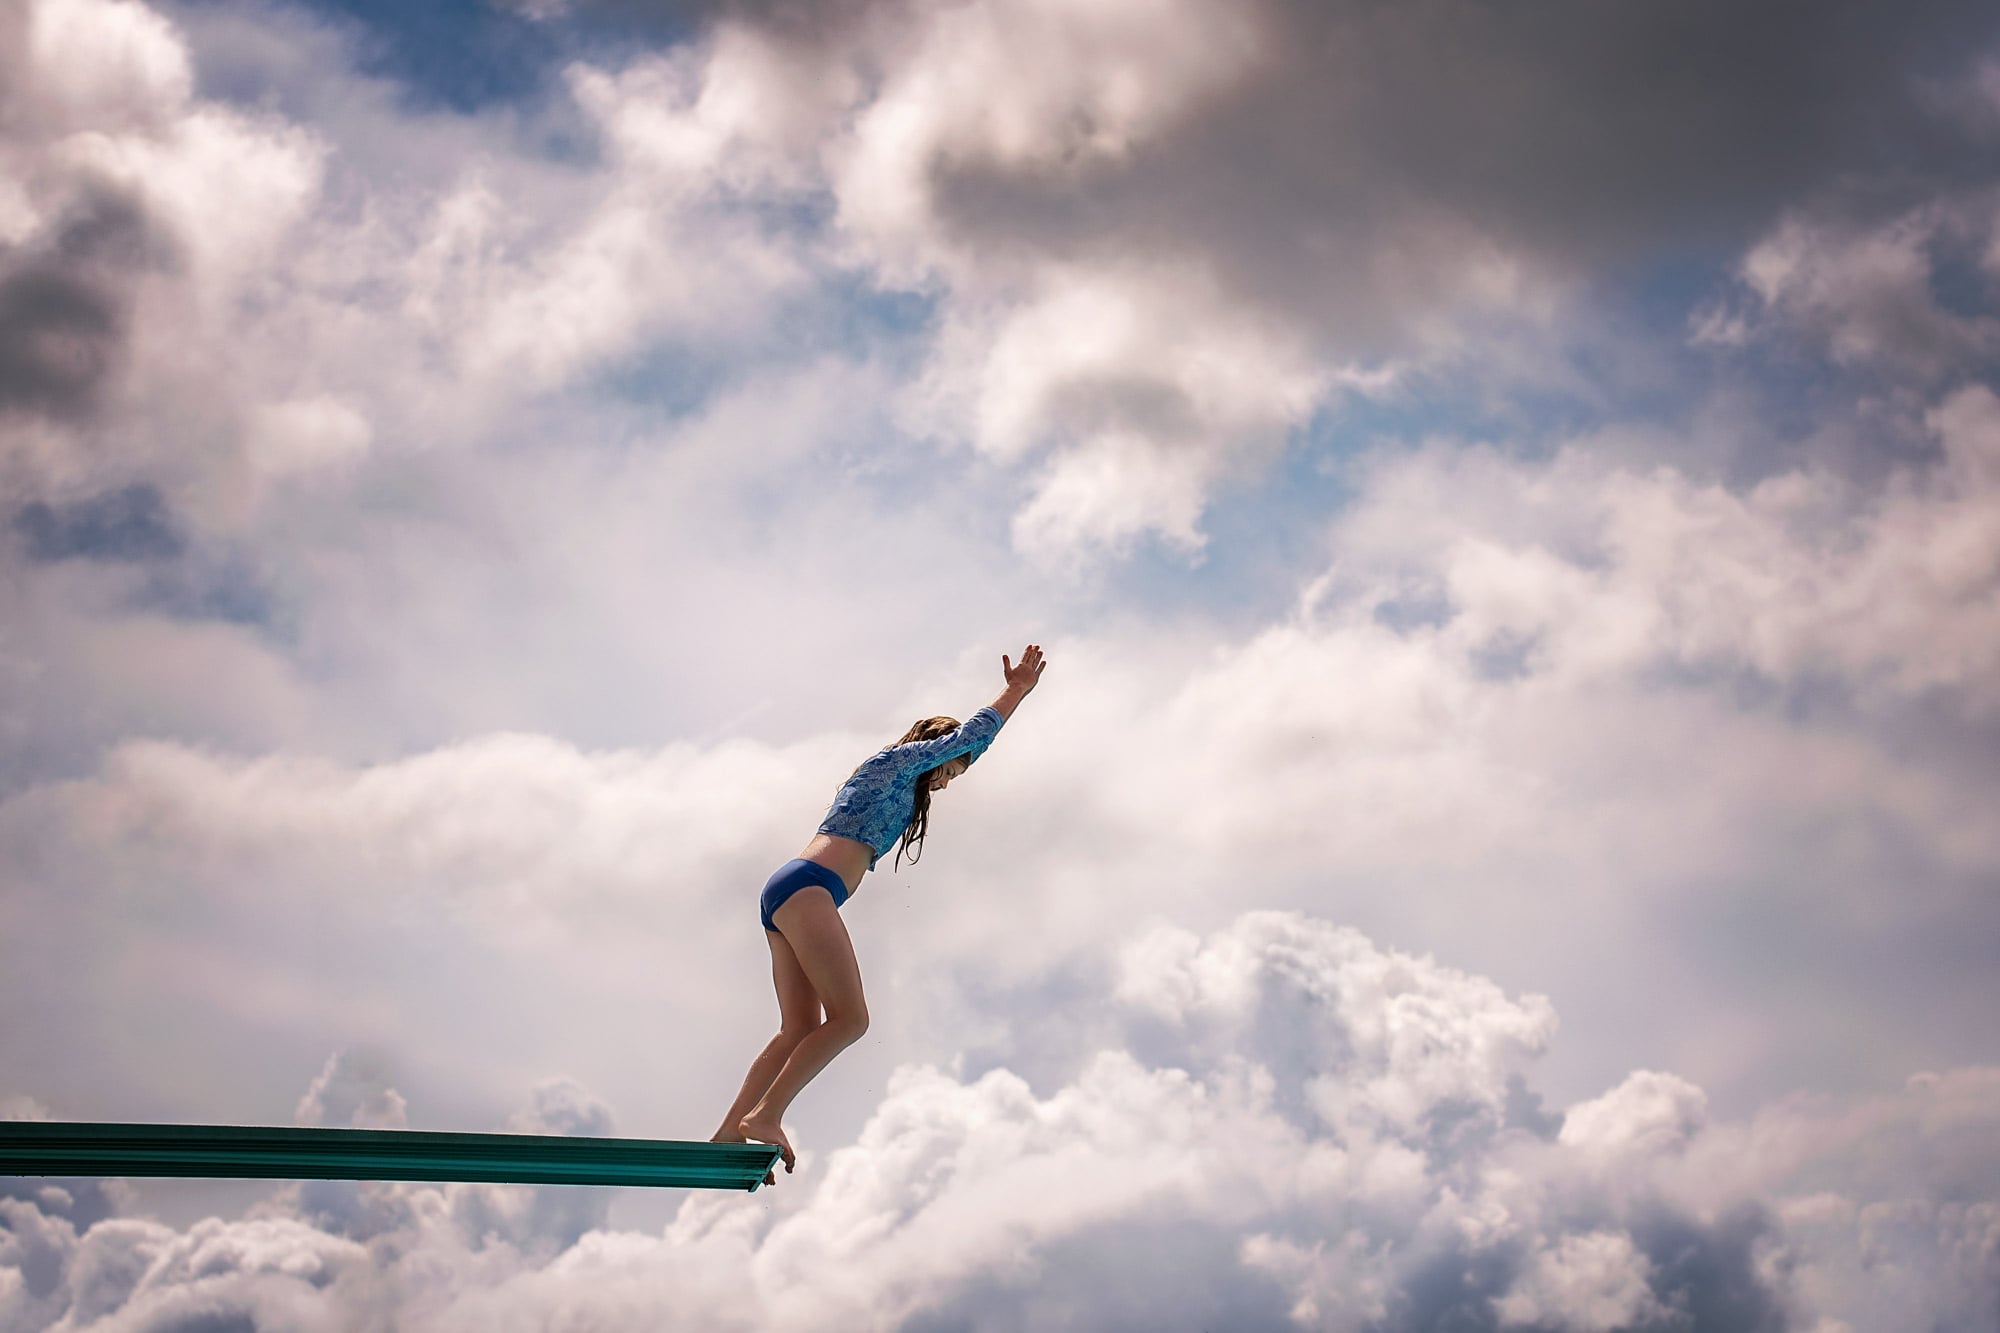 girl in diving position on diving board with blue sky and clouds in background 